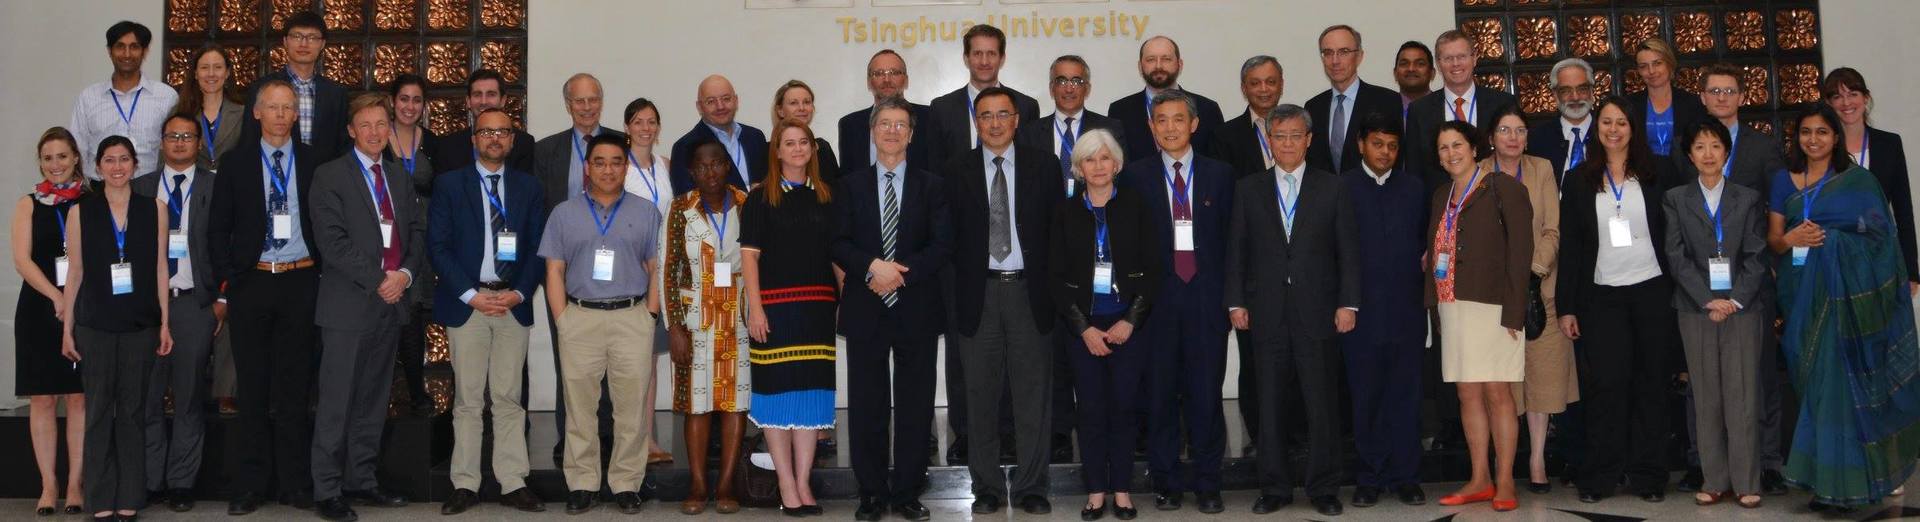 Sustainable Development Solutions Network (SDSN) members standing together